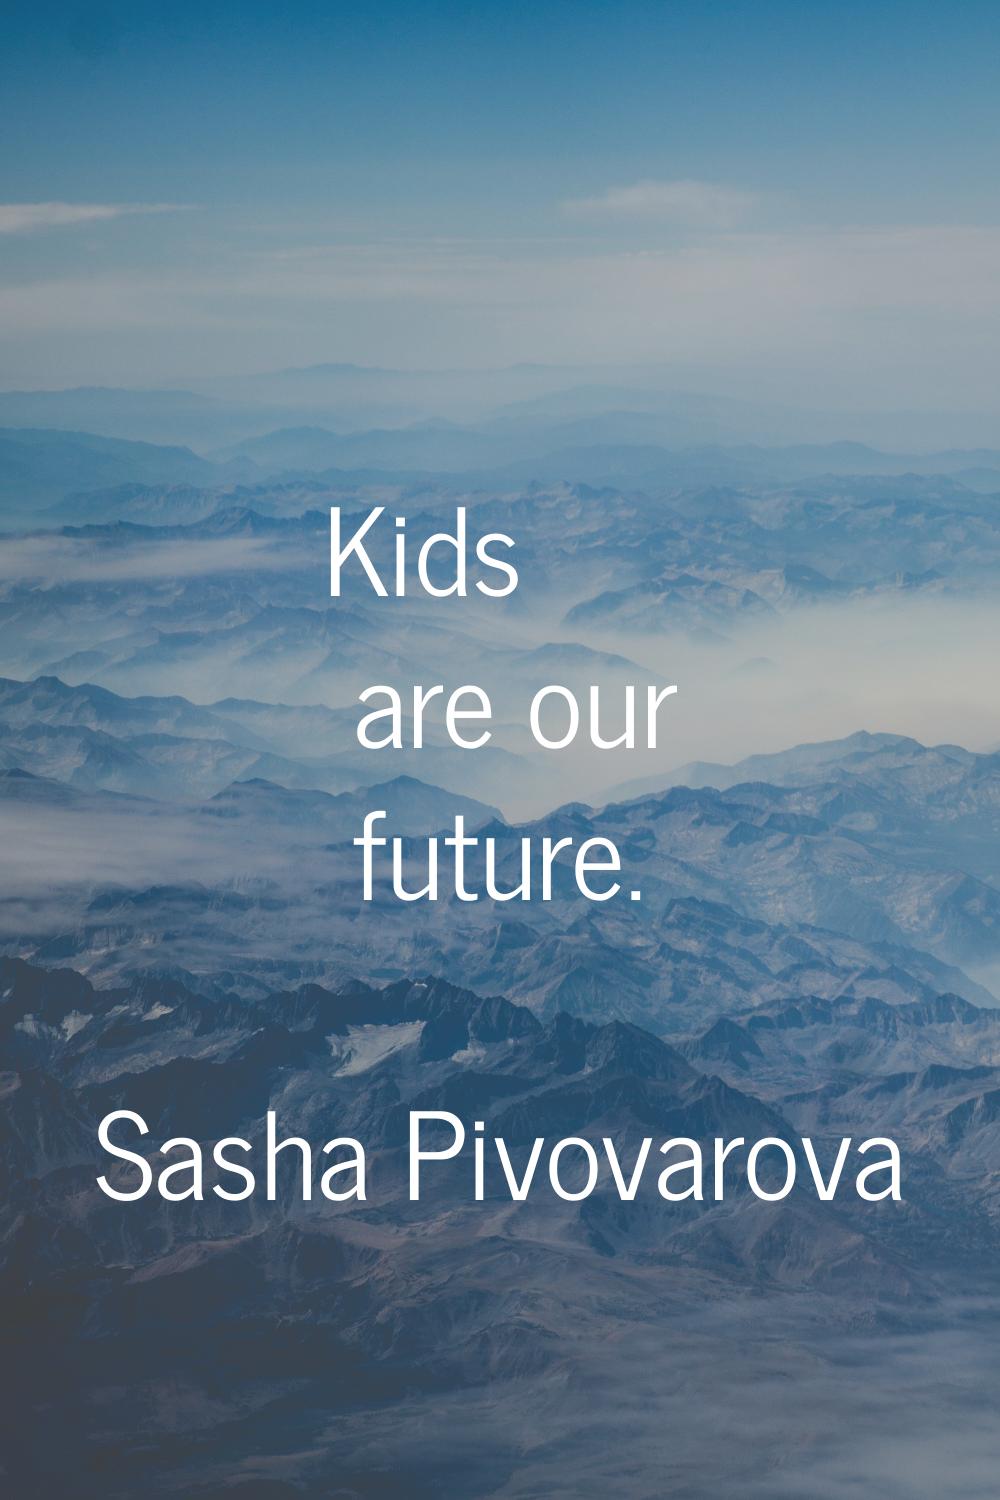 Kids are our future.